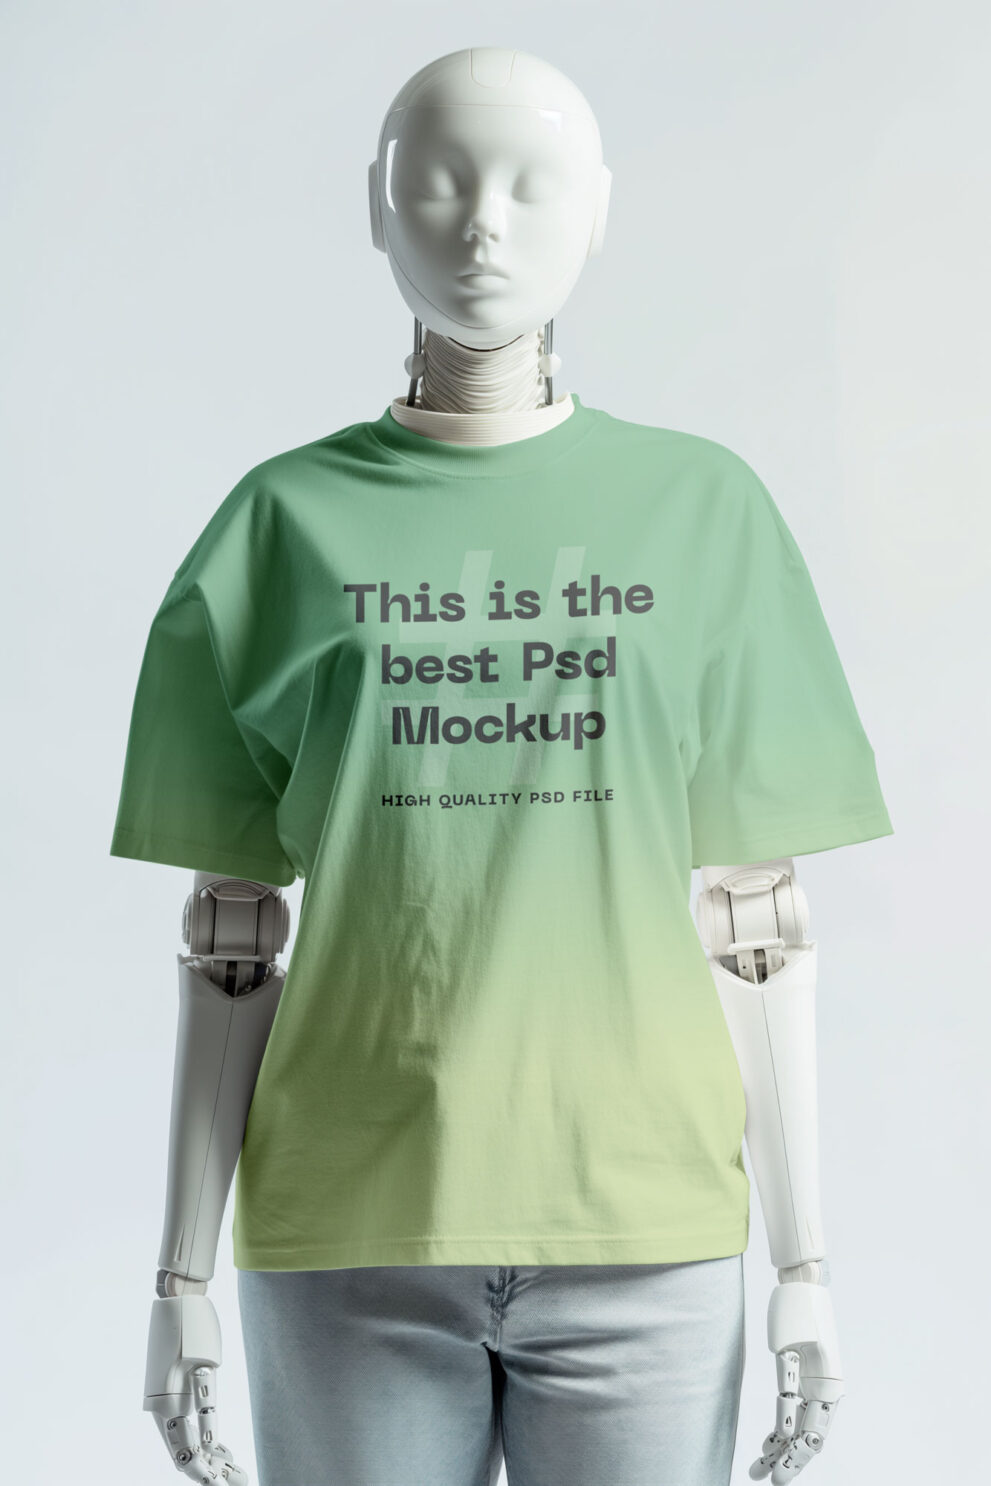 Free Download Oversized robot t-shirt template